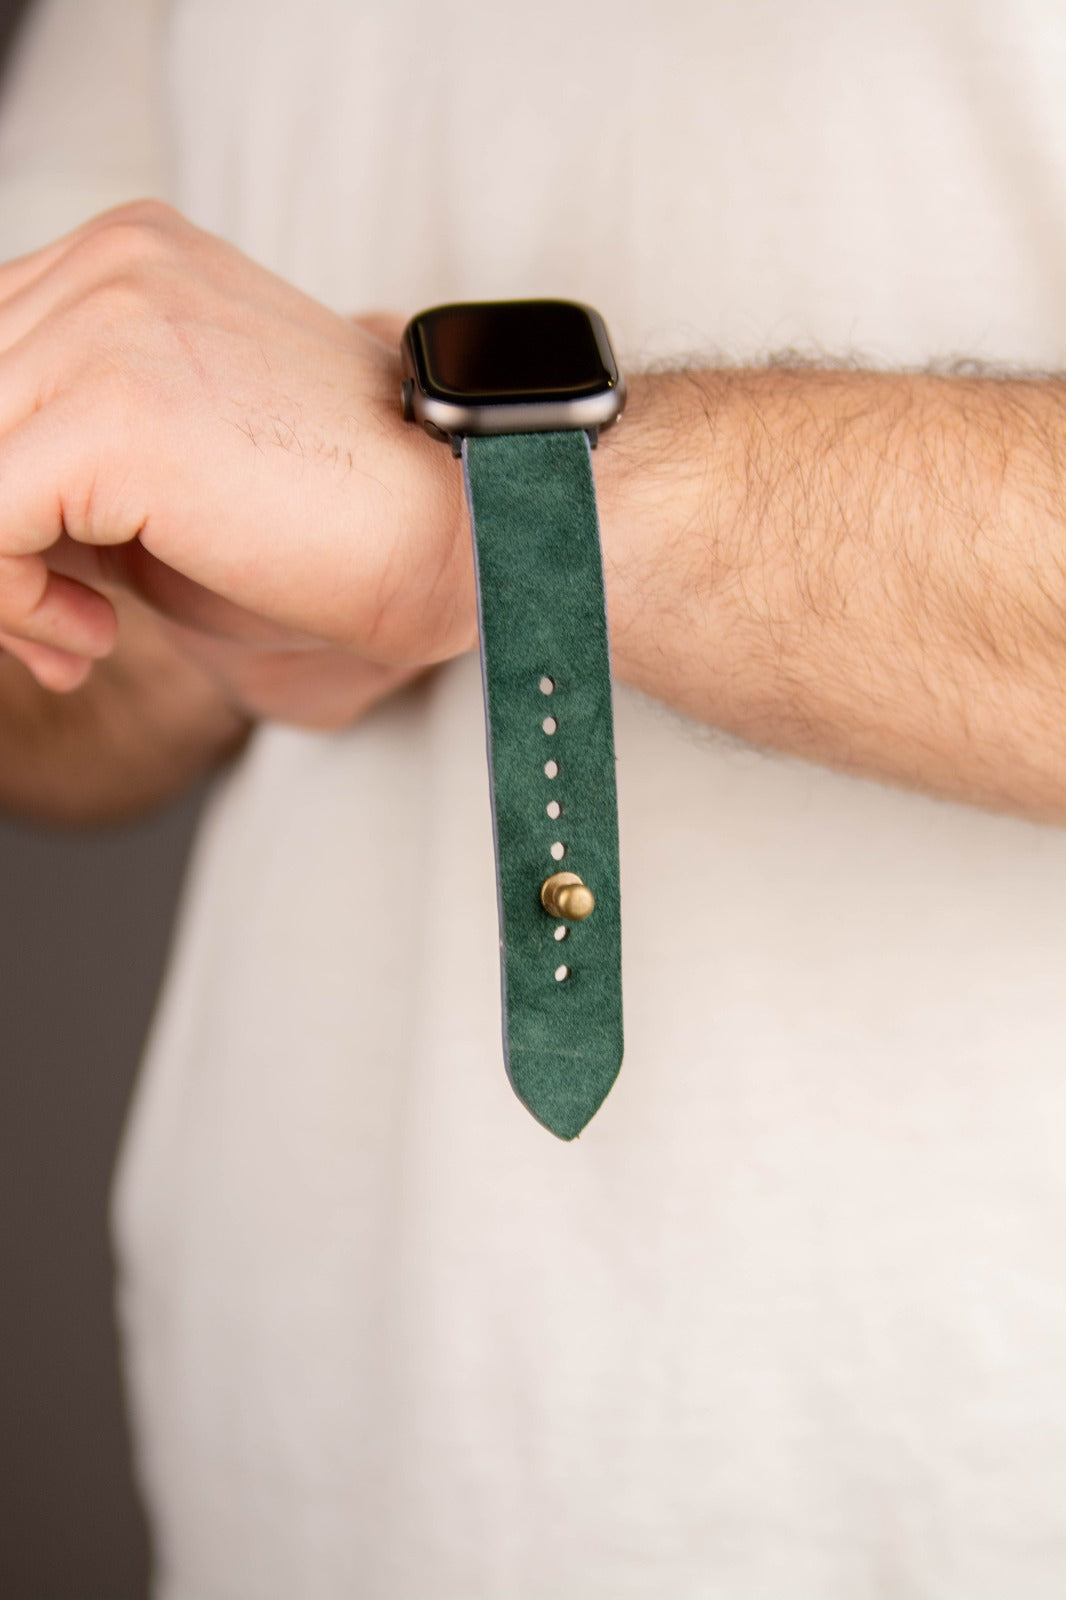 Emerald Green Apple Watch Strap - Suede Leather Strap